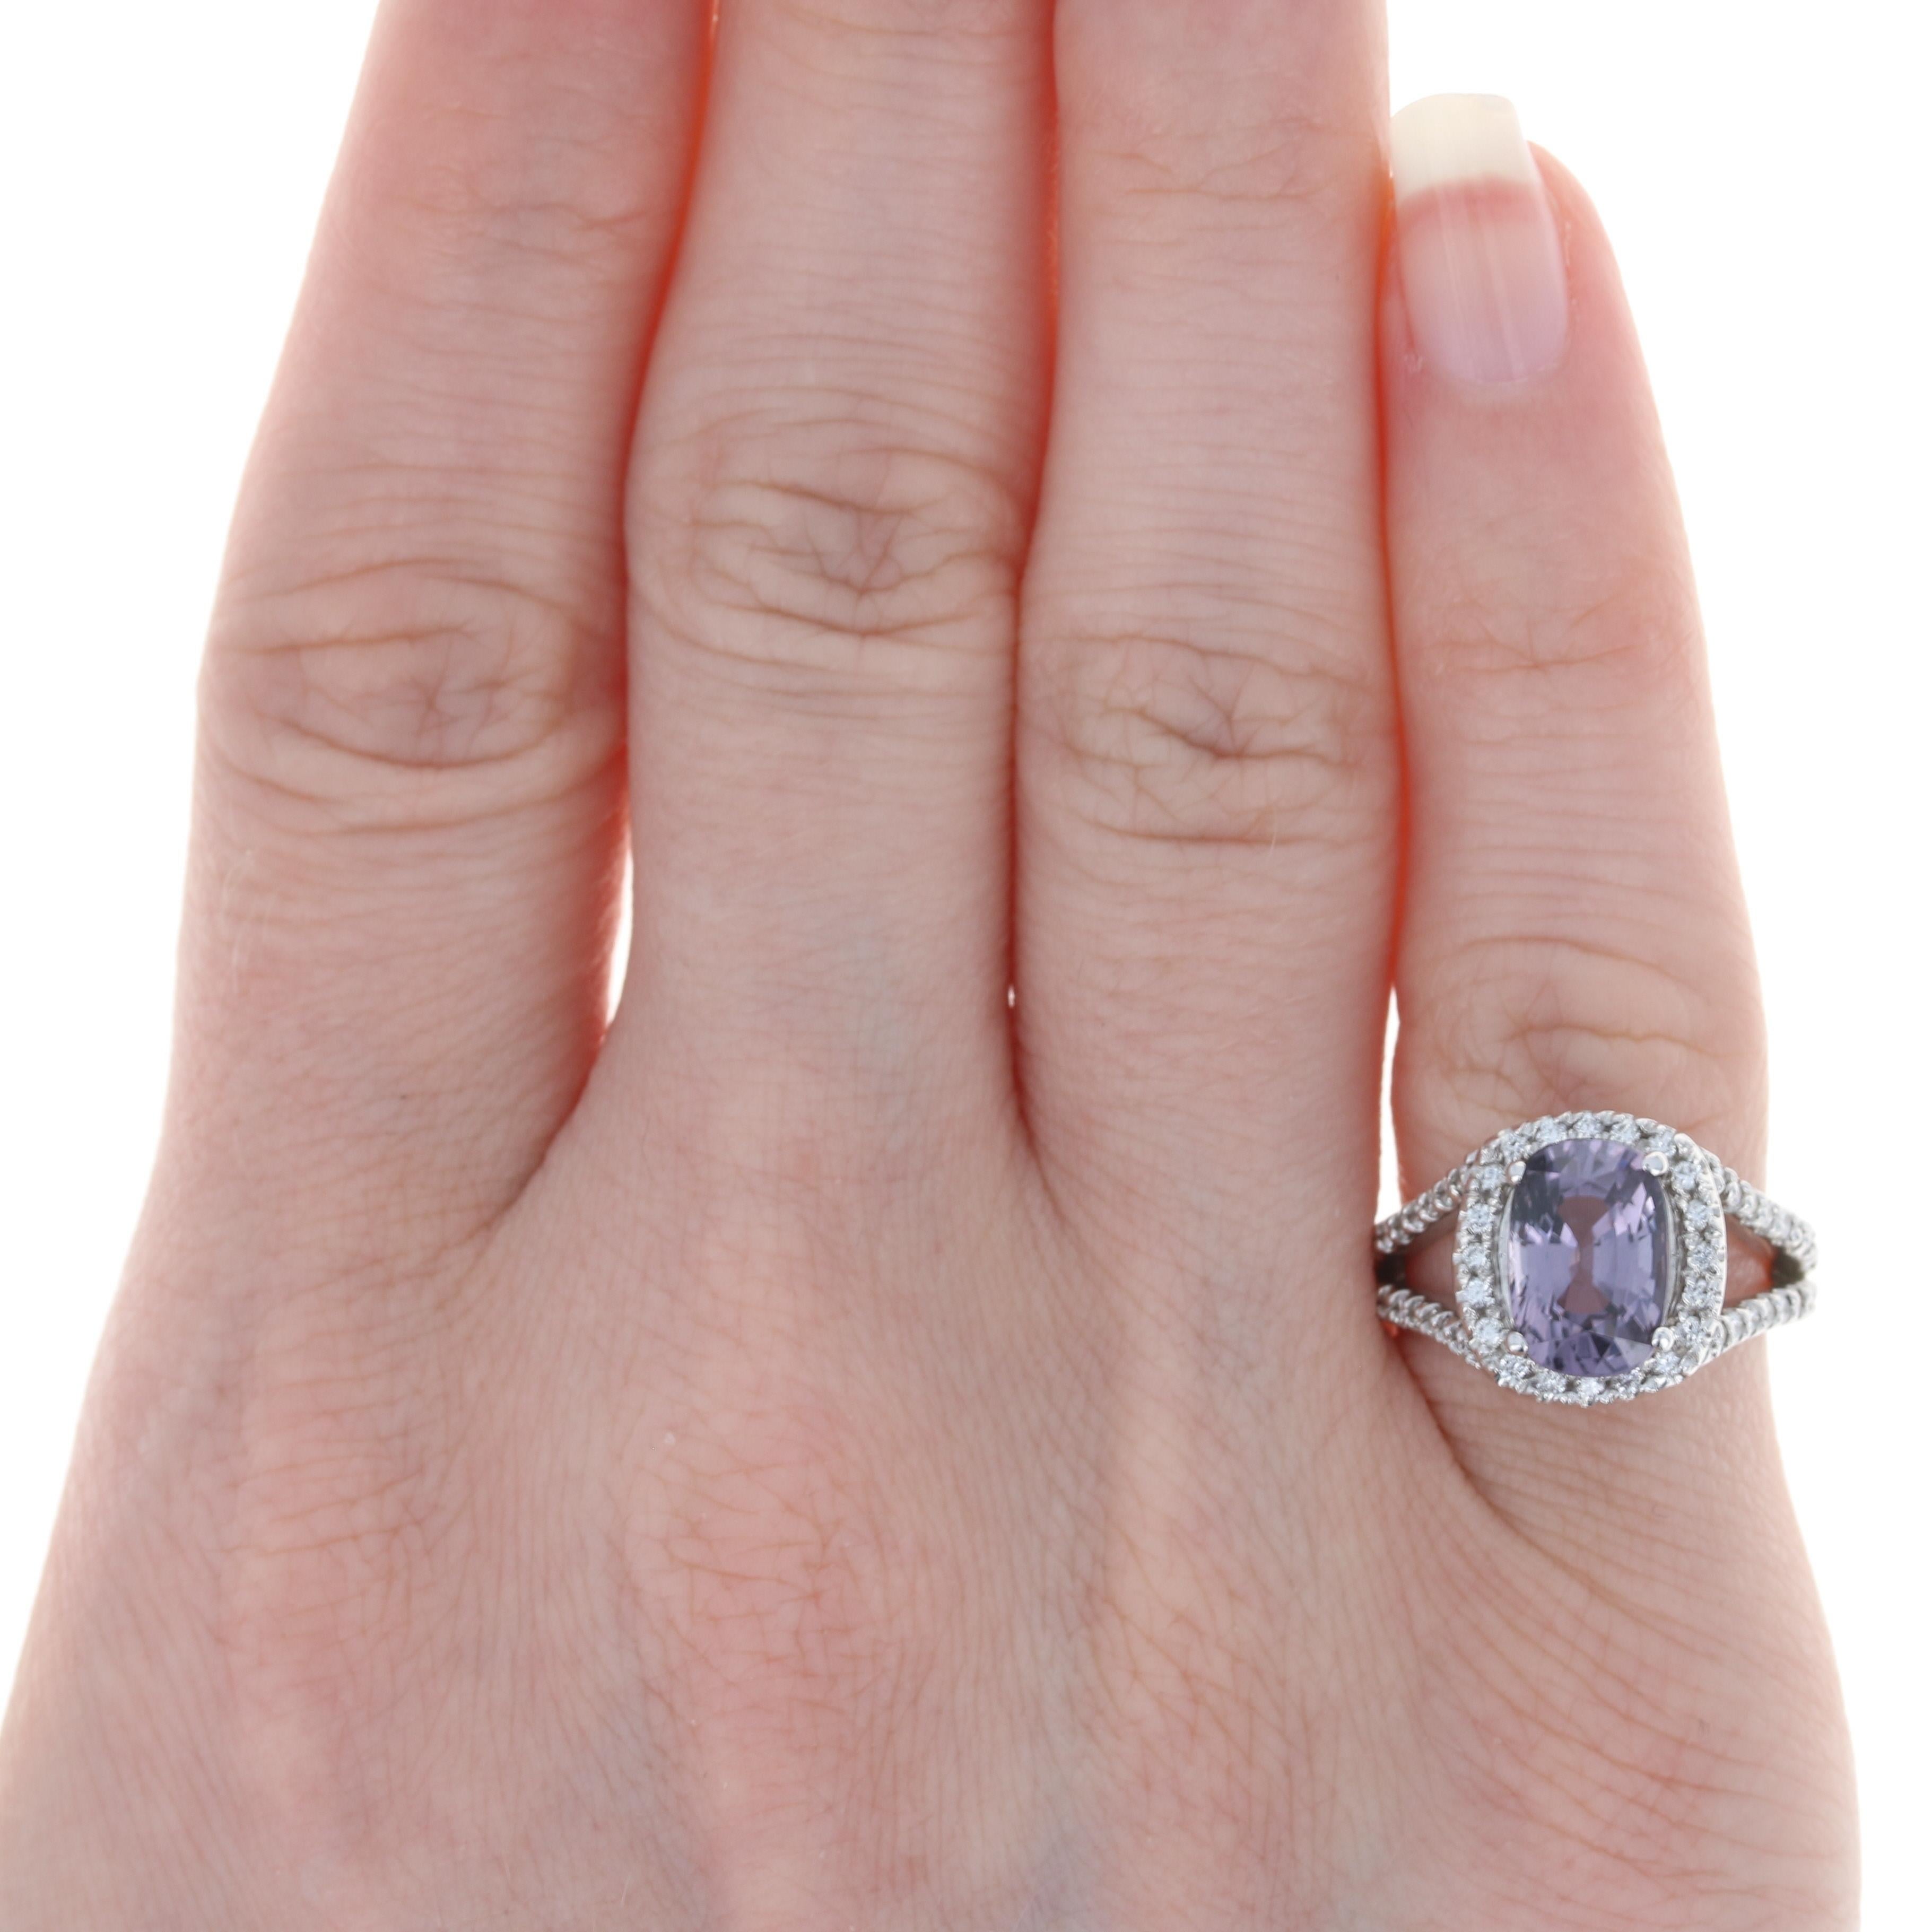 Size: 4 1/2
 Sizing Fee: Up 2 sizes for $40
 
 Metal Content: 14k White Gold
 
 Stone Information: 
 Genuine Spinel
 Carat: 2.62ct (weighed)
 Cut: Cushion
 Color: Purple 
 Size: 9.8mm x 6.6mm
 
 Natural Diamonds
 Carats: .45ctw
 Cut: Round